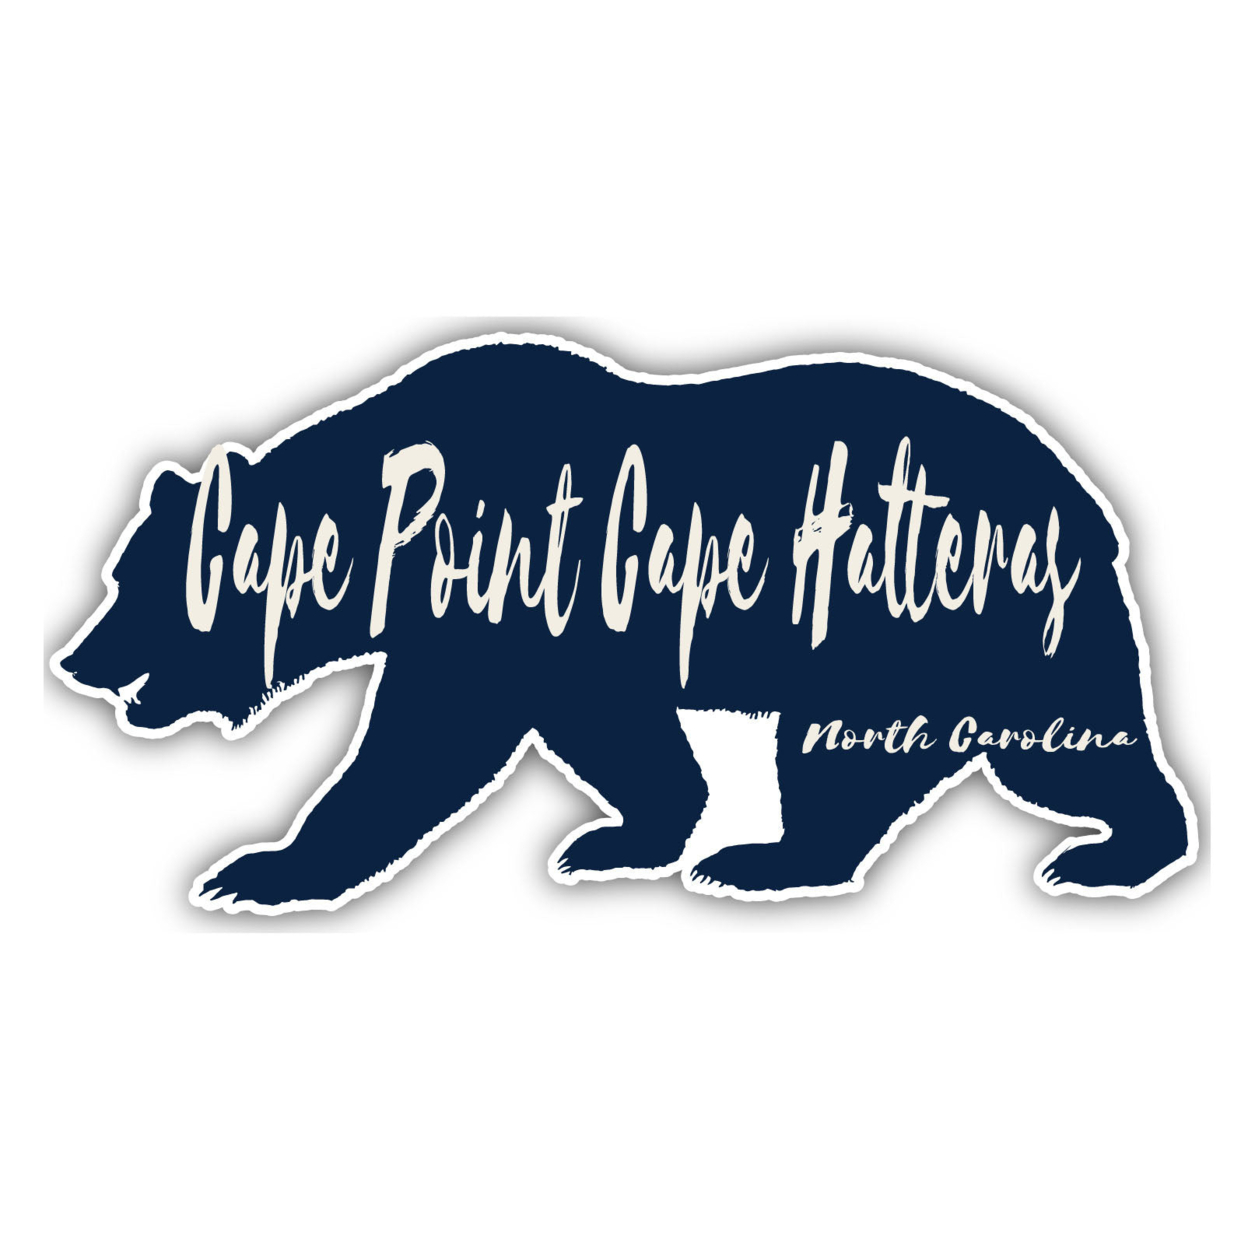 Cape Point Cape Hatteras North Carolina Souvenir Decorative Stickers (Choose Theme And Size) - 4-Pack, 4-Inch, Bear